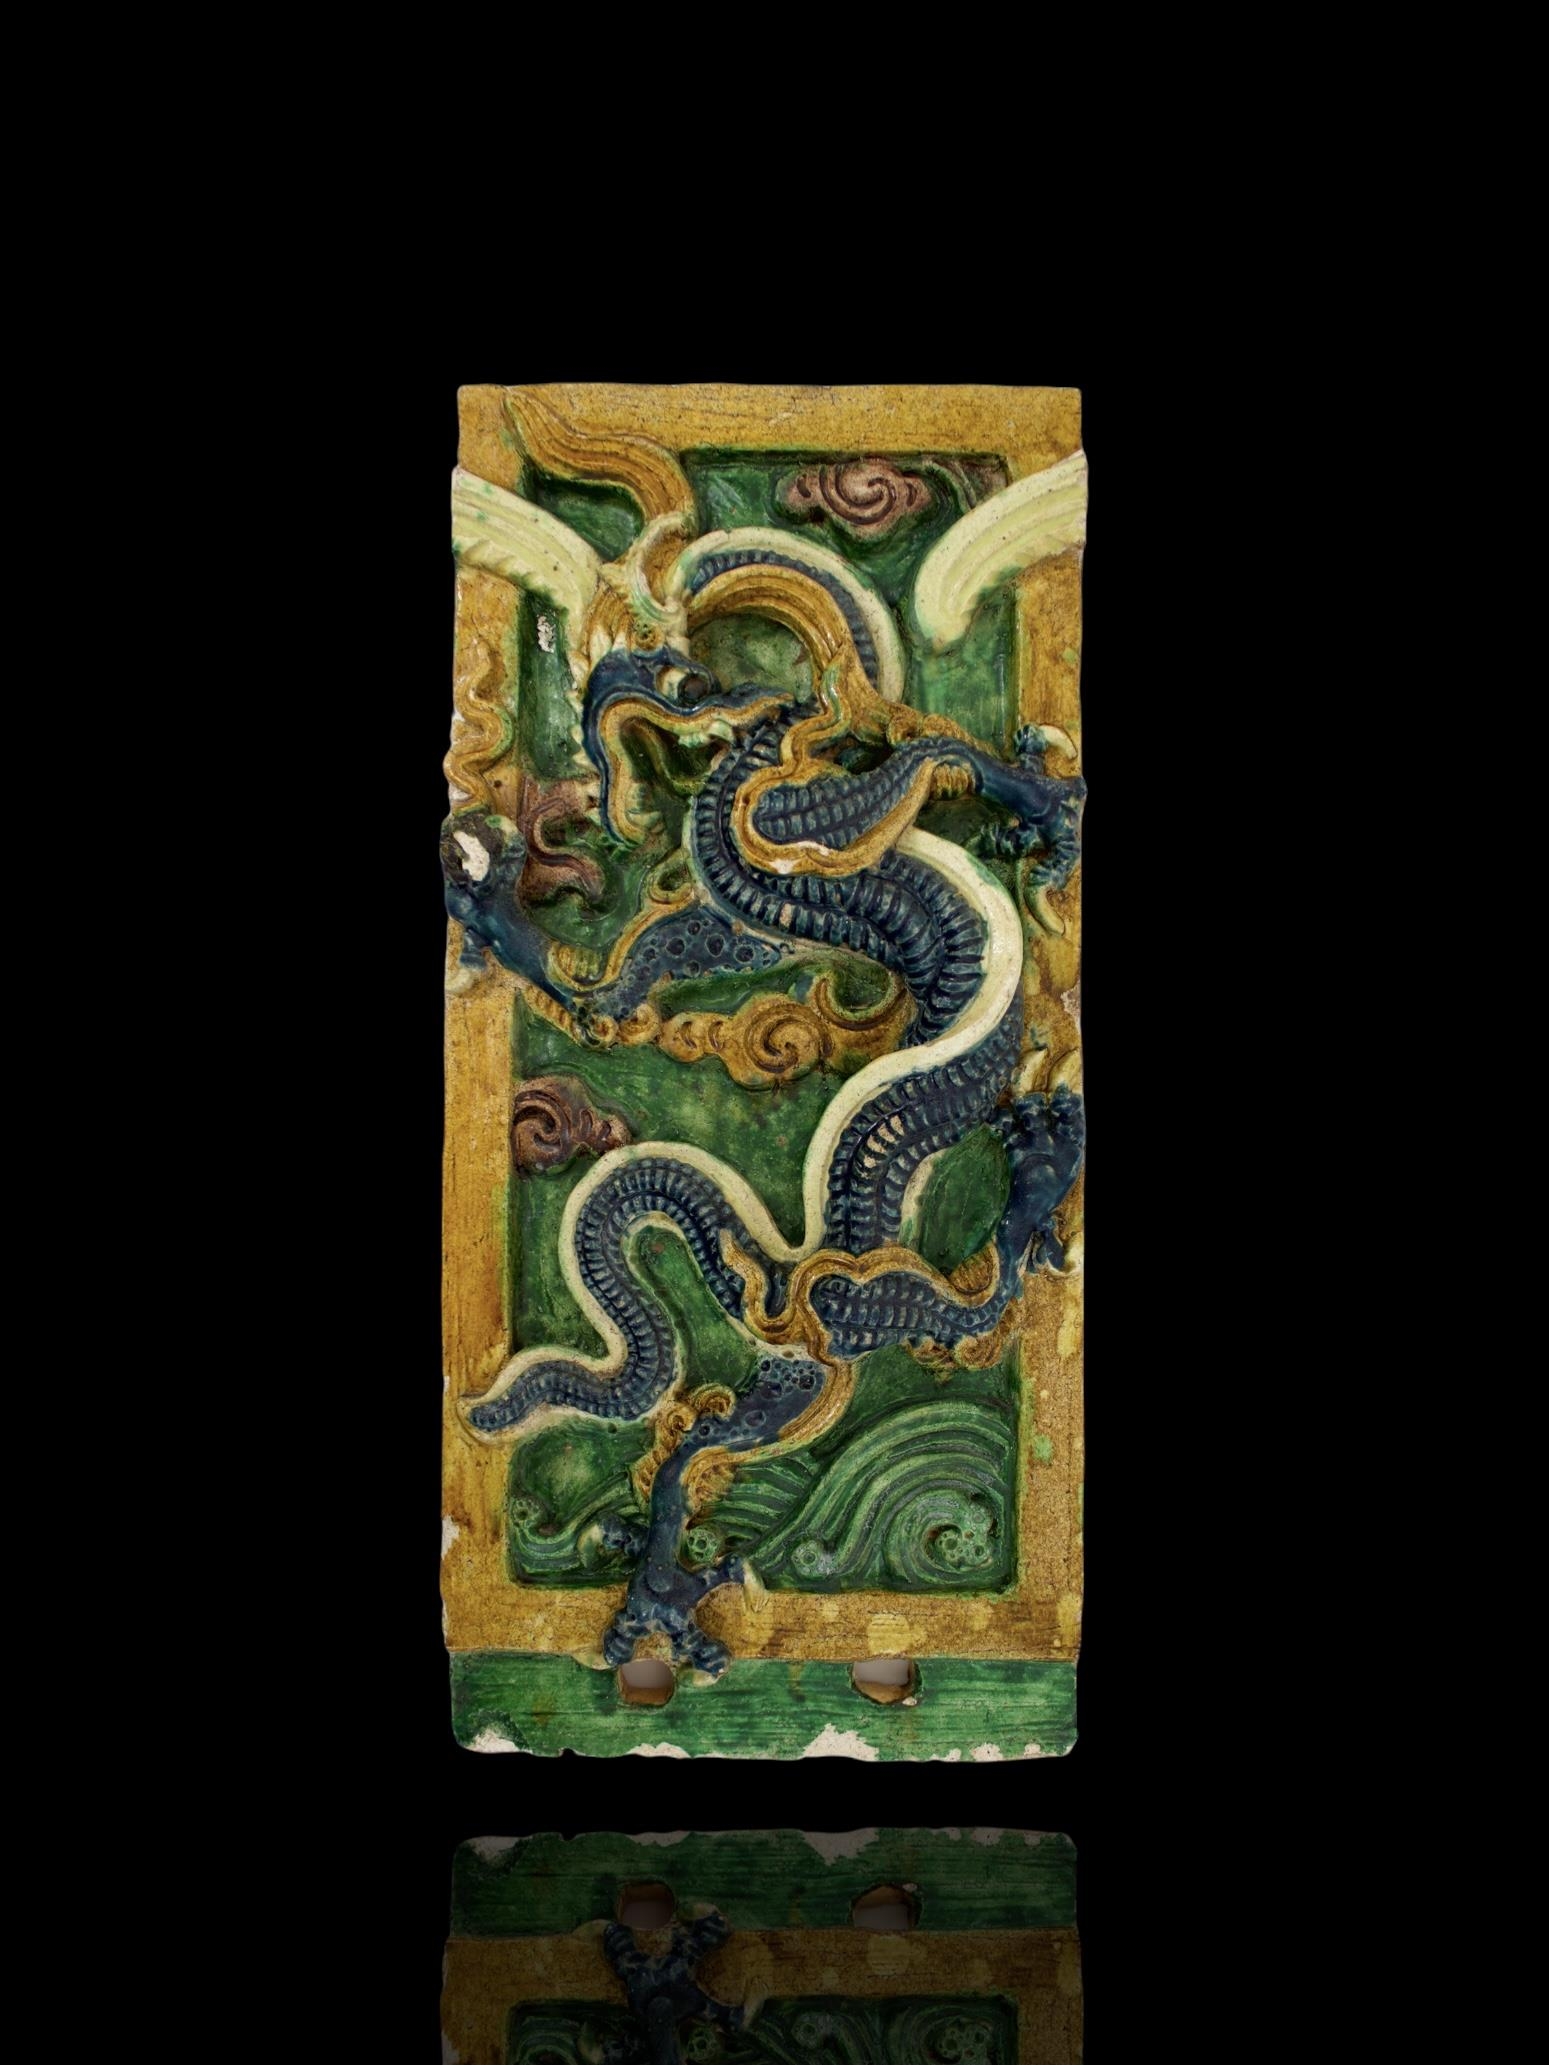 A blue, amber and green glazed Dragon Tile, Ming Dynasty - - L54.5cm W25.5cm - - of upright